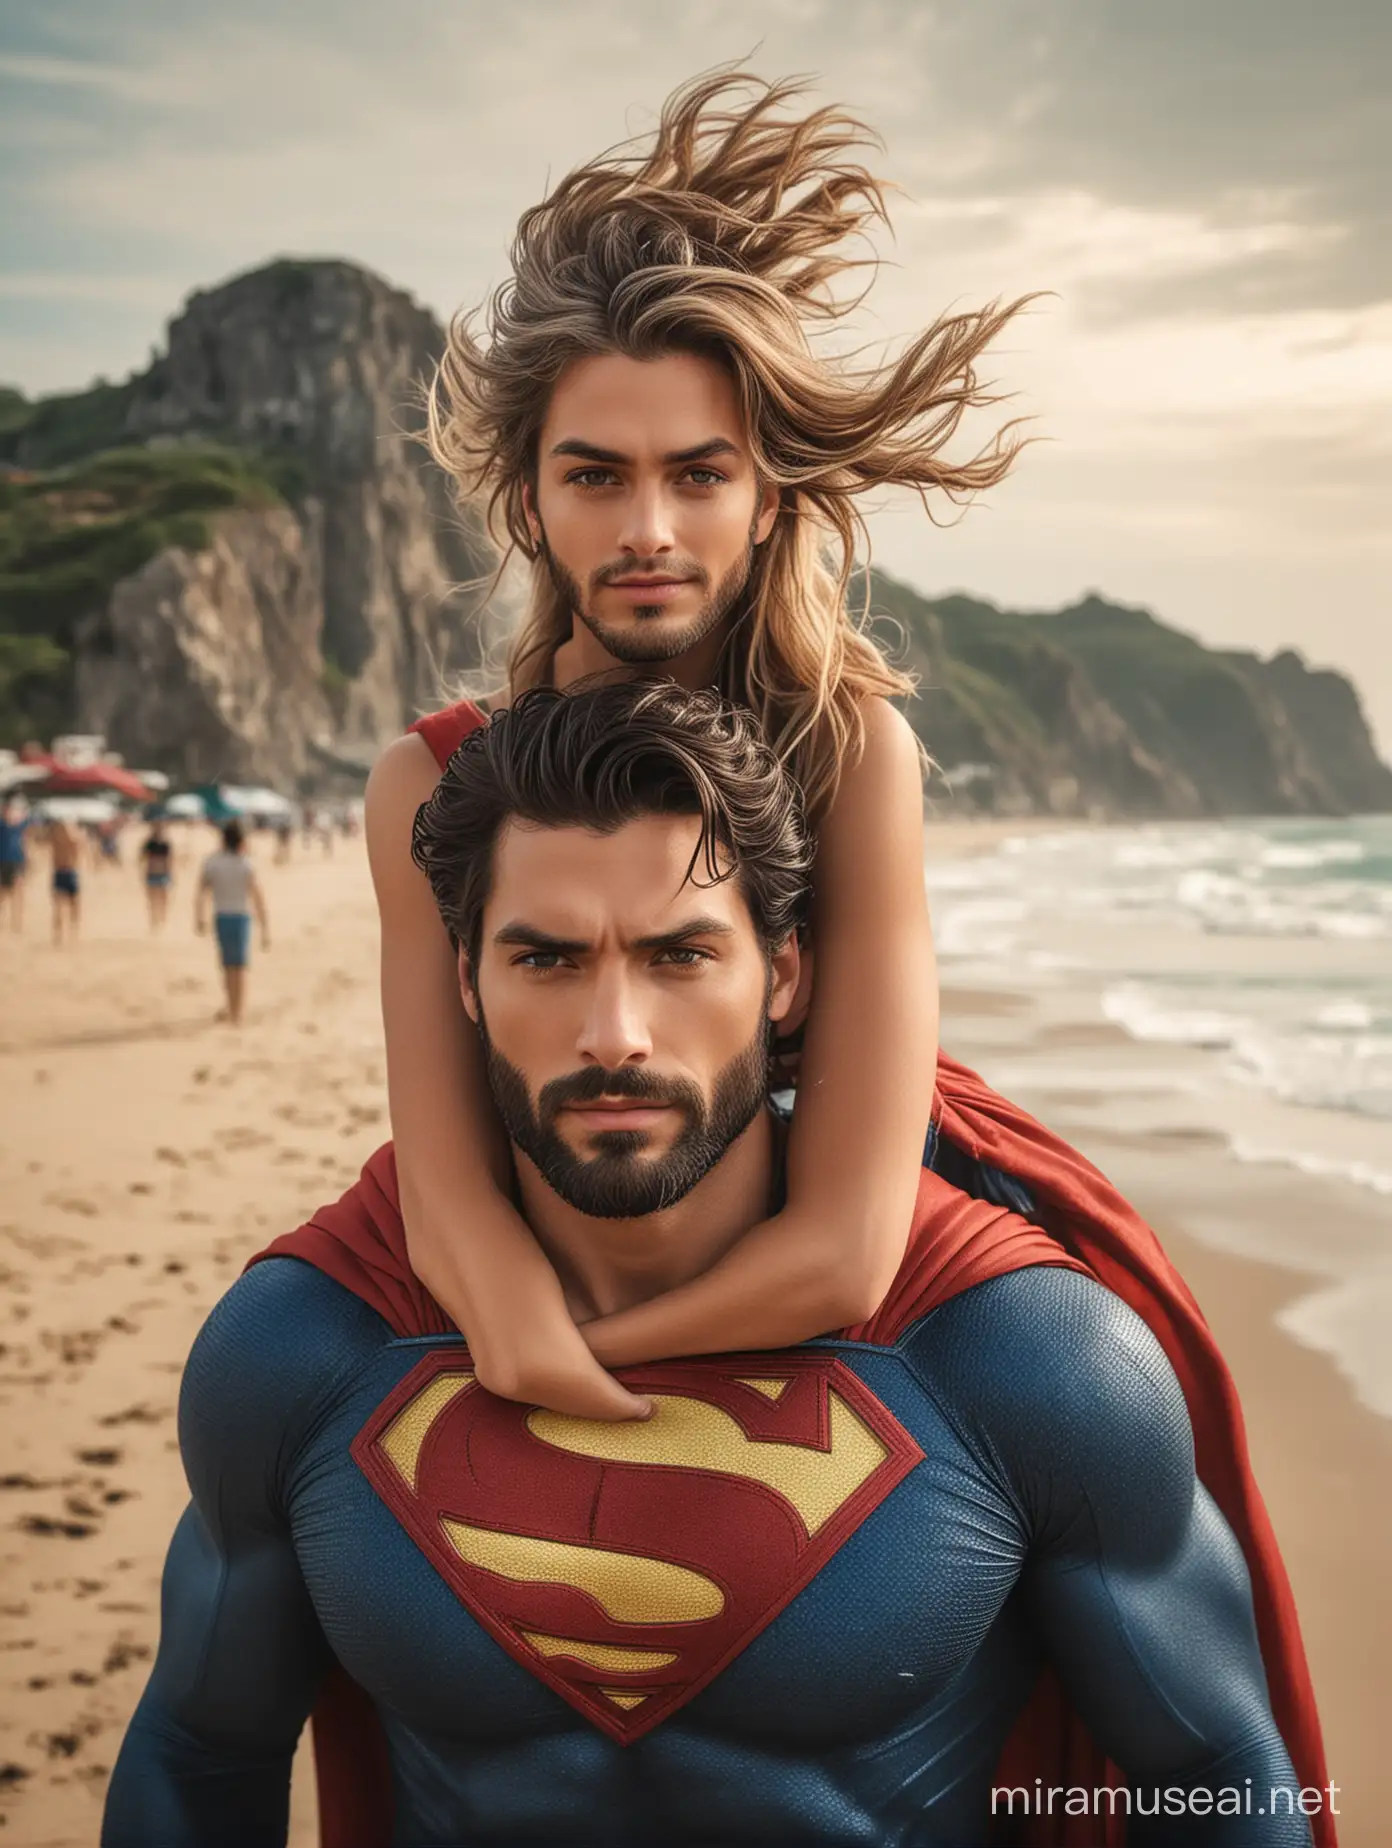 Handsome and mascular Superman with beautiful hairstyle and beard carrying a girl on his shoulders with beach in background 